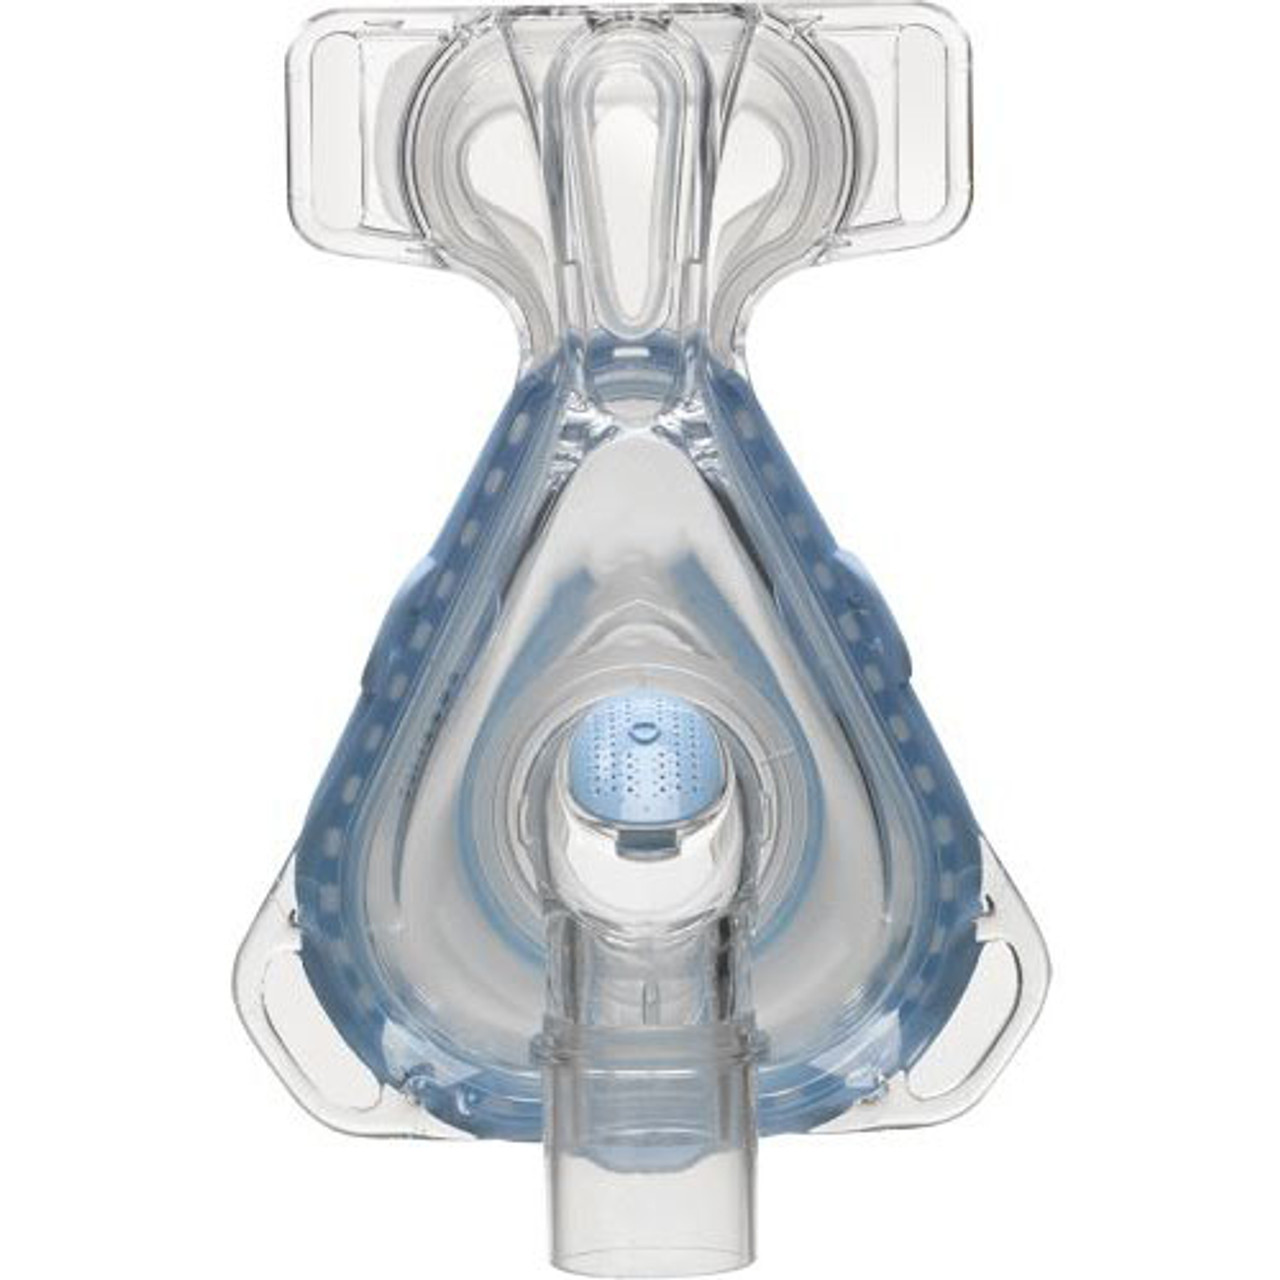 Reference example of Full Face CPAP Mask
(actual product may appear slightly different)
